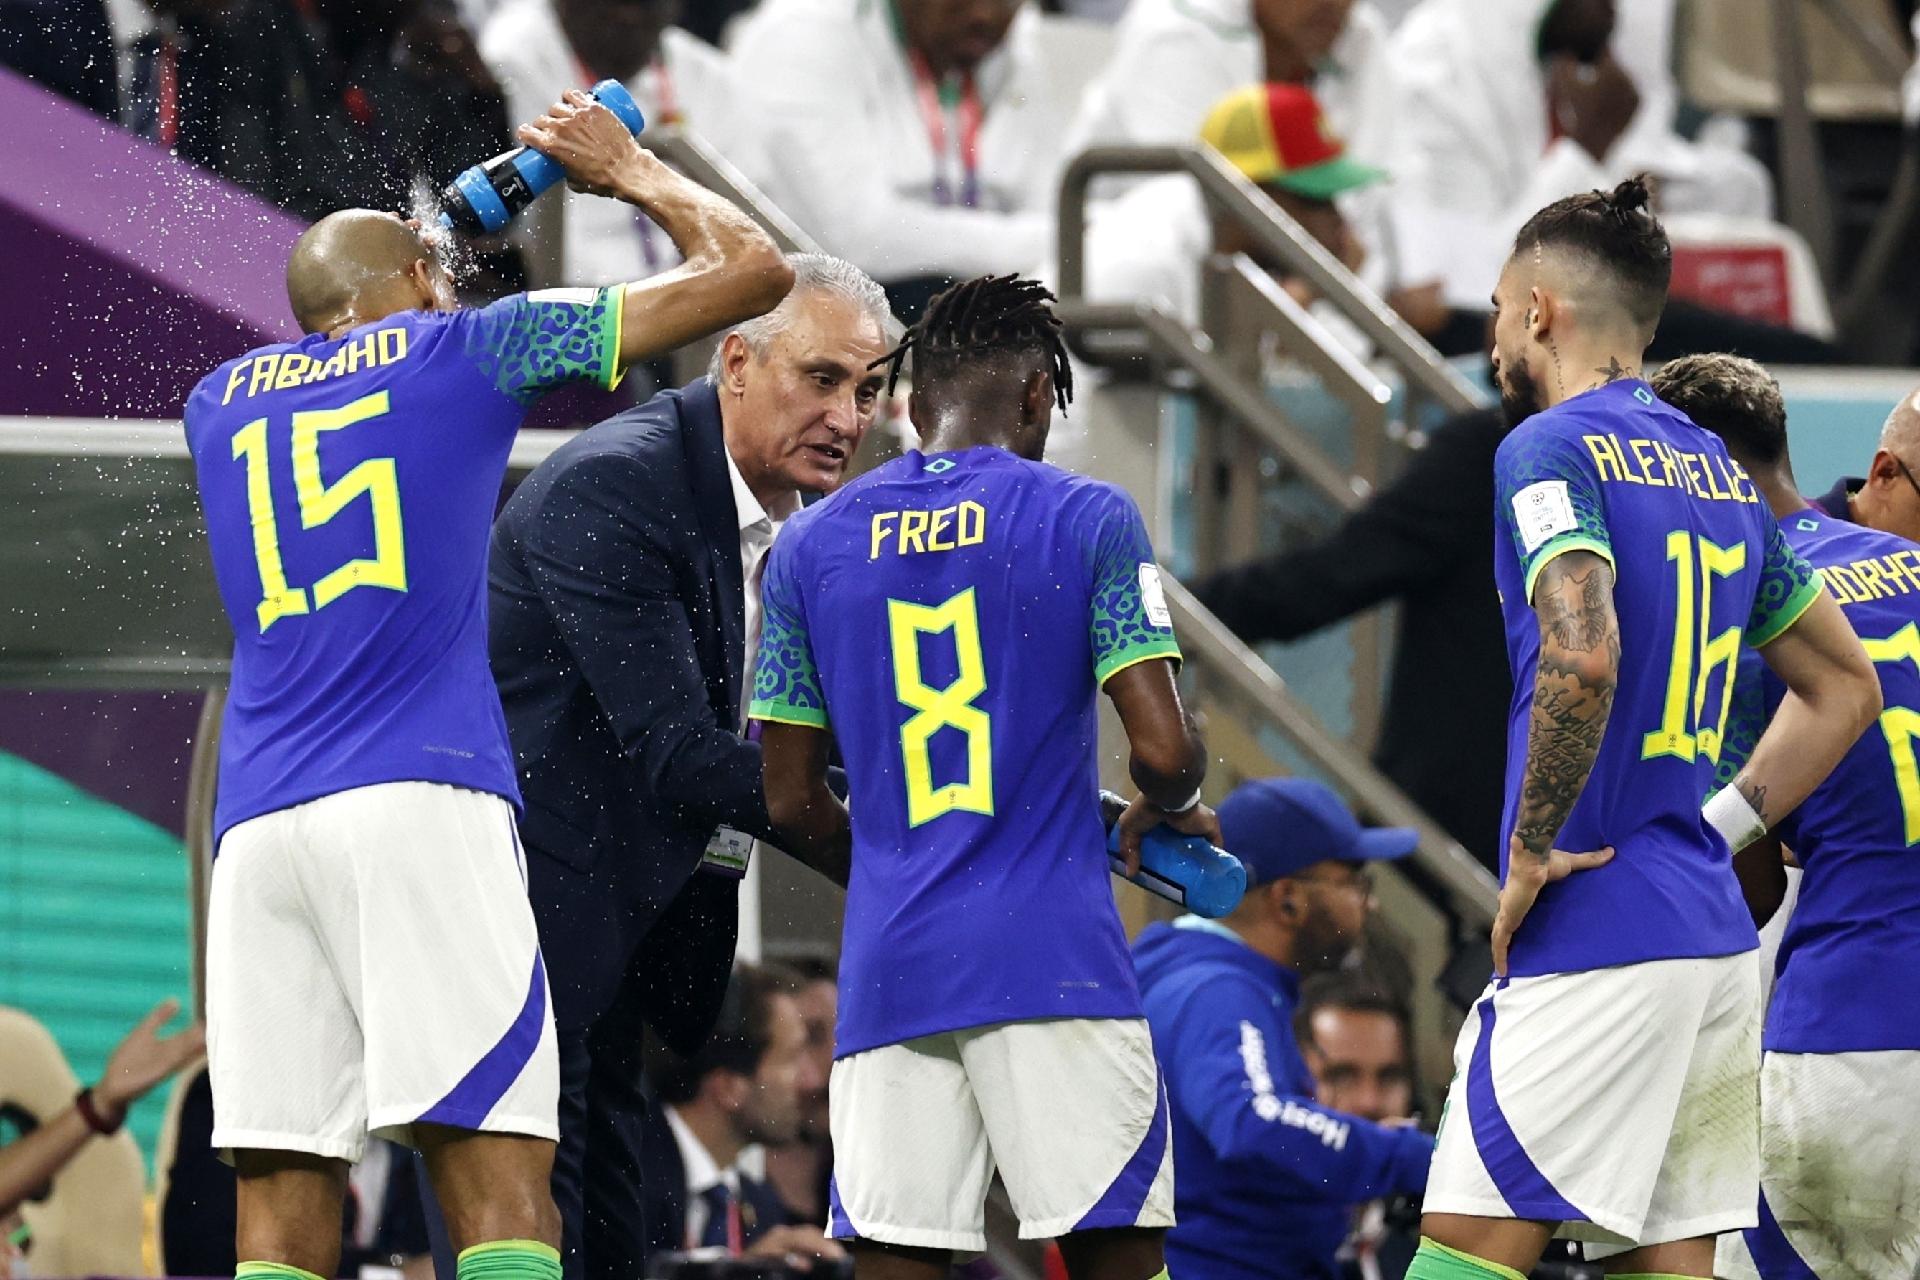 Tite instructs Fred during the match between Cameroon and Brazil - ANP via Getty Images